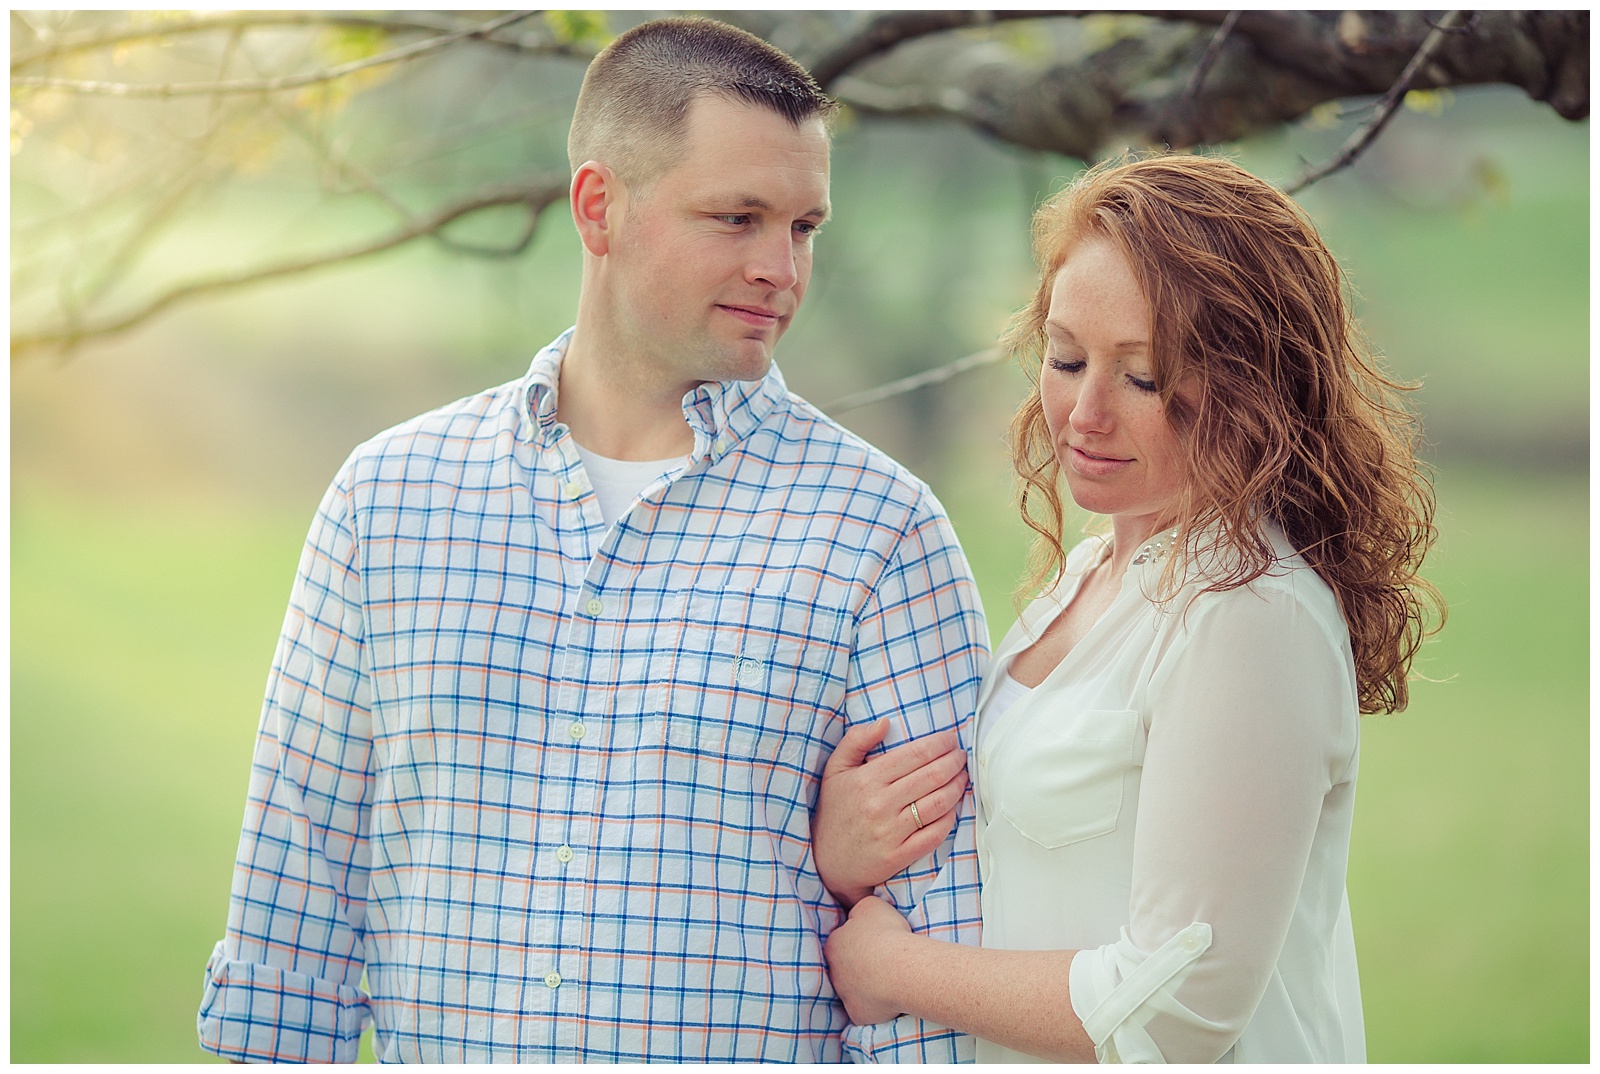 An engagement session at Belvoir Winery in Liberty, Missouri.